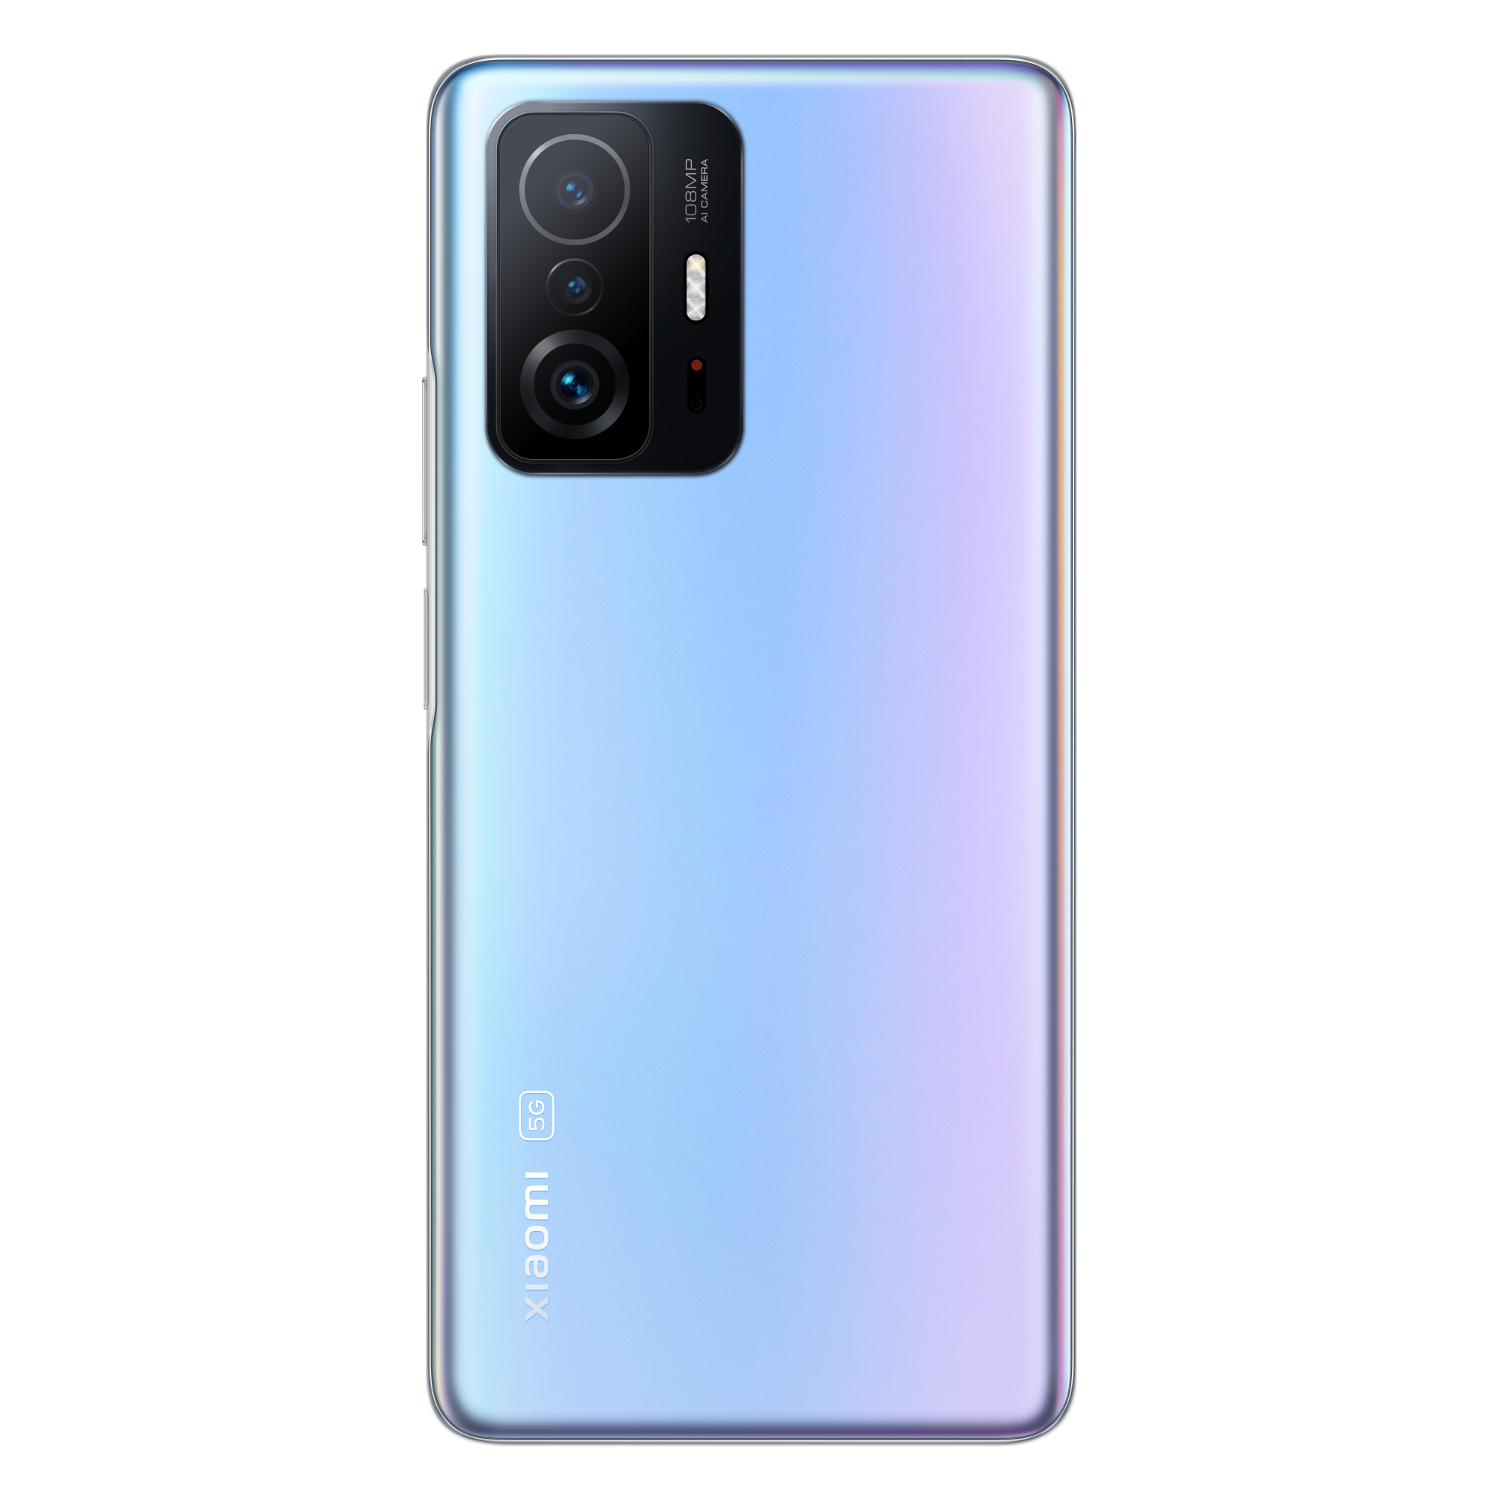 Find Xiaomi 11T Global Version 6 67 inch 120Hz AMOLED 8GB 128GB Dimensity 1200 Ultra 67W Fast Charge NFC Octa Core 5G Smartphone for Sale on Gipsybee.com with cryptocurrencies